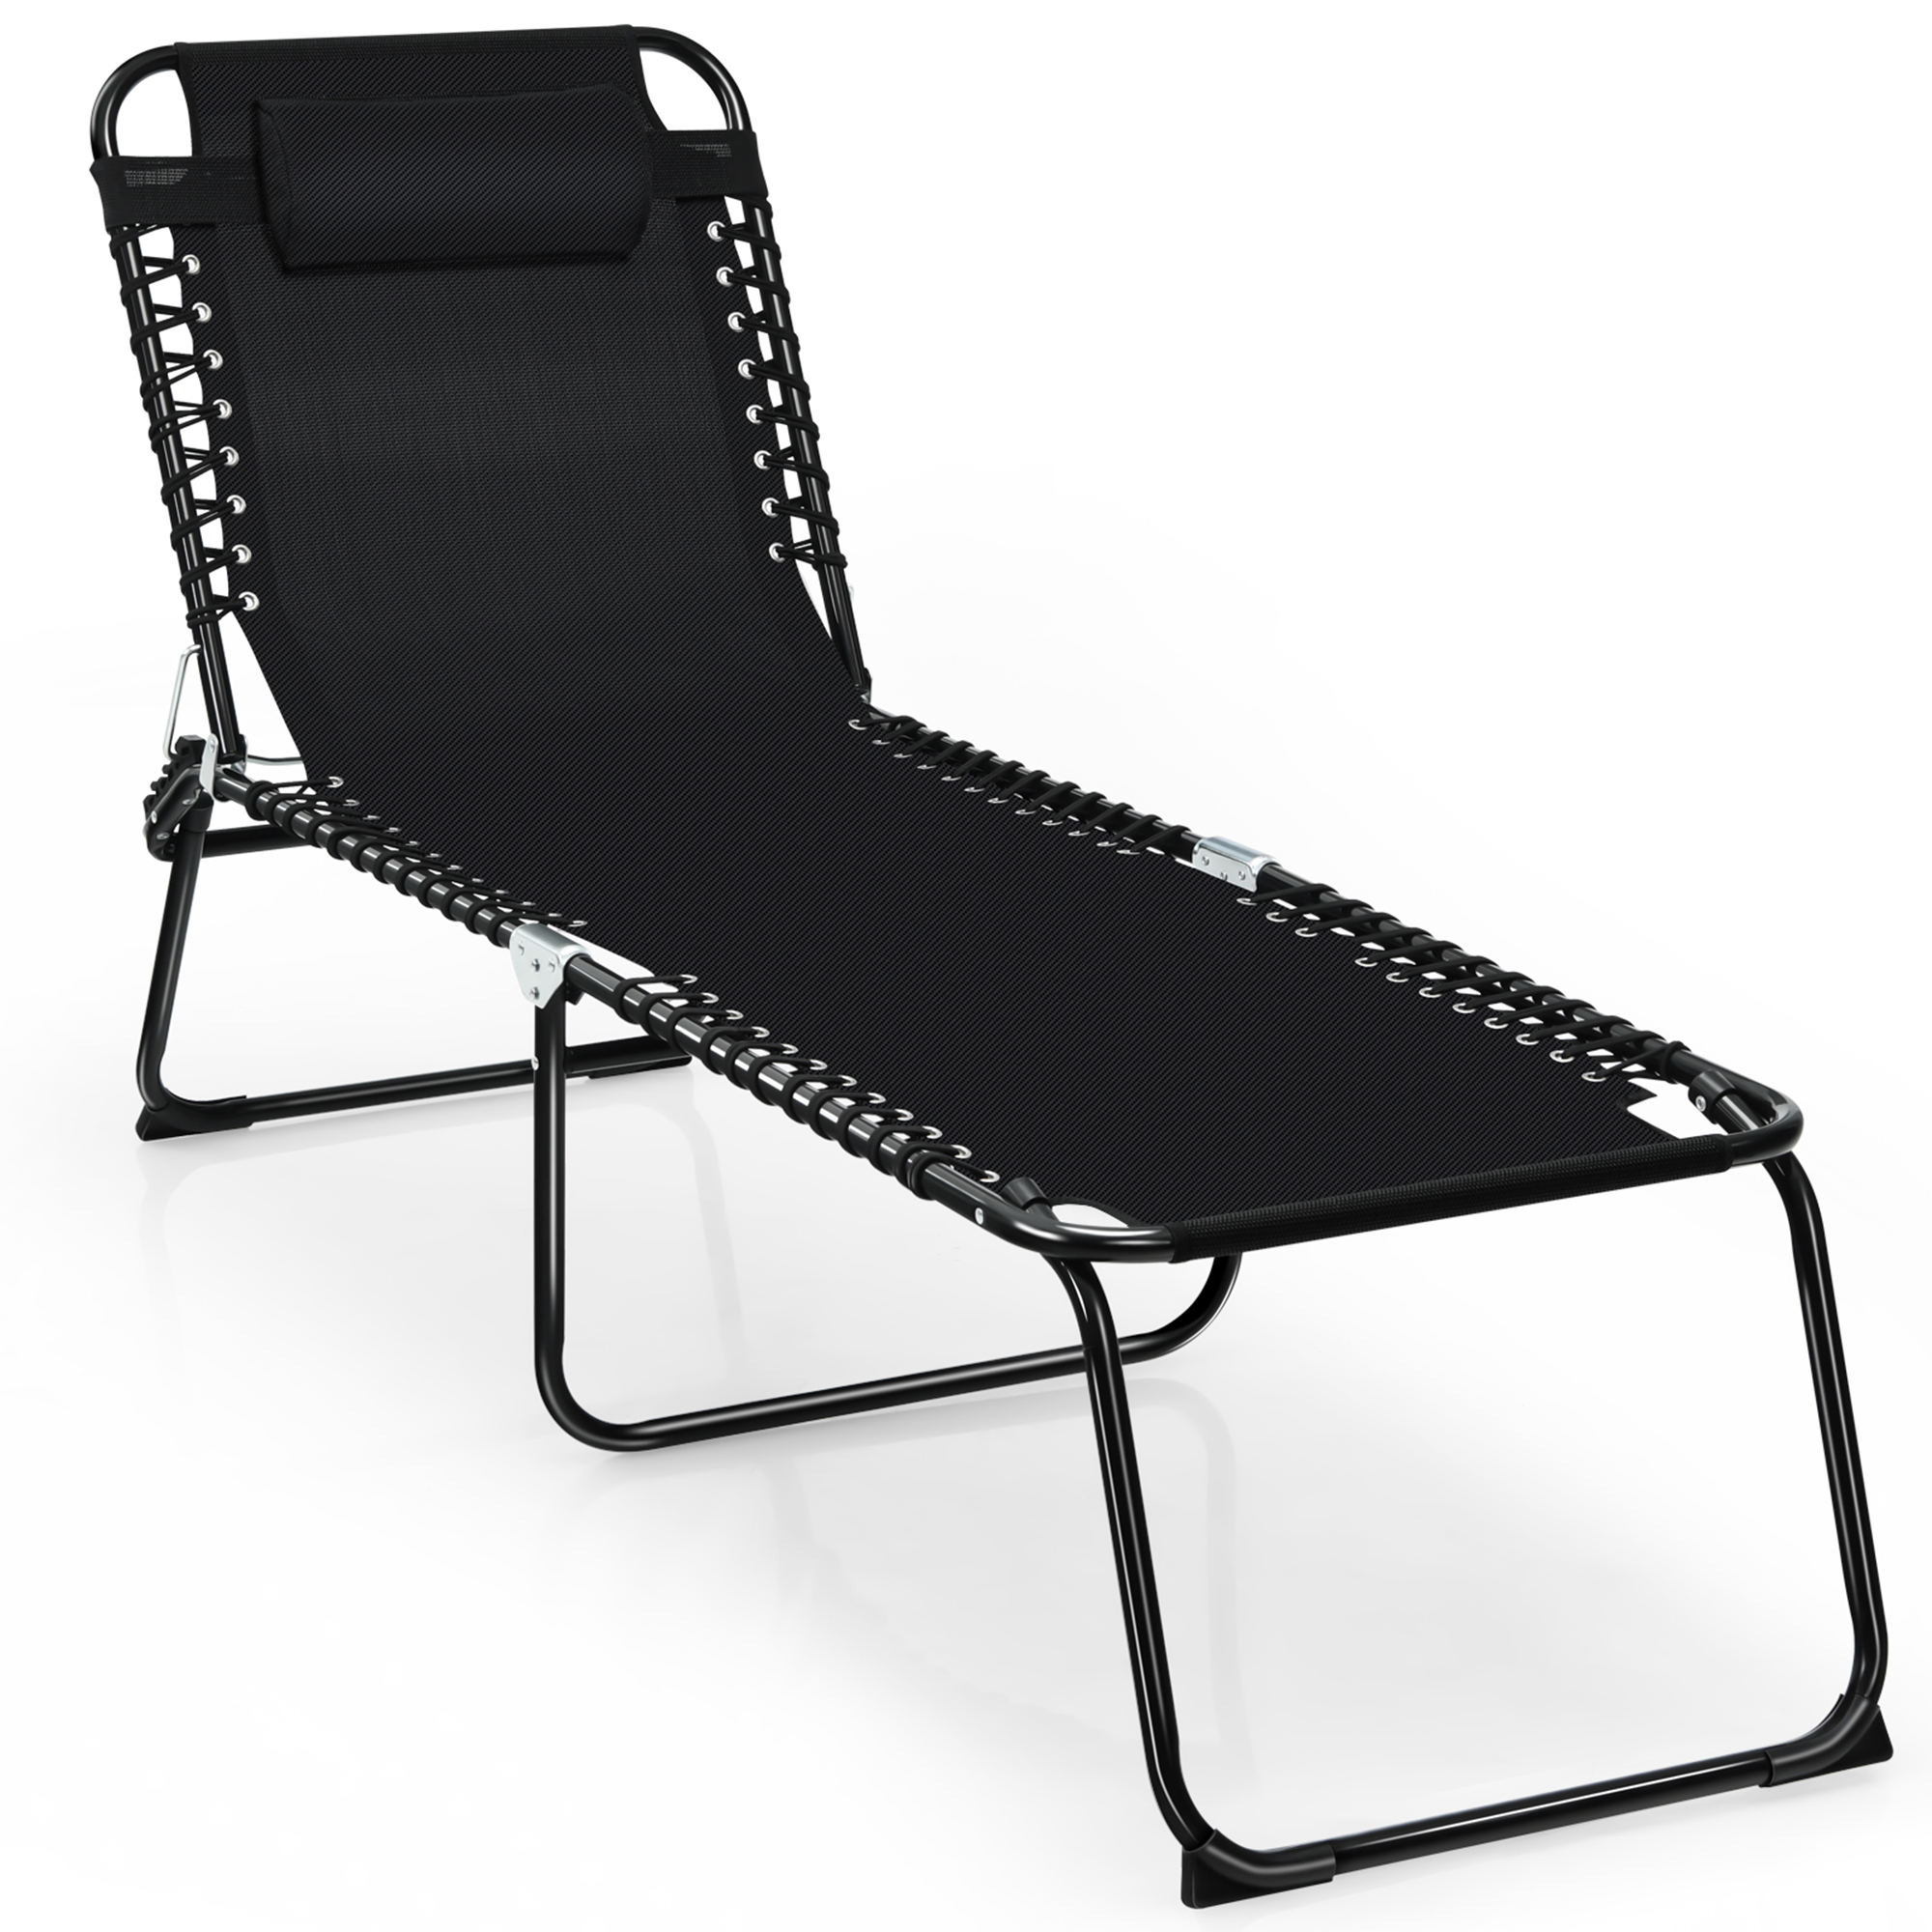 Gymax Folding Beach Lounger Chaise Lounge Chair w/ Pillow 4-Level Backrest Black - image 5 of 10